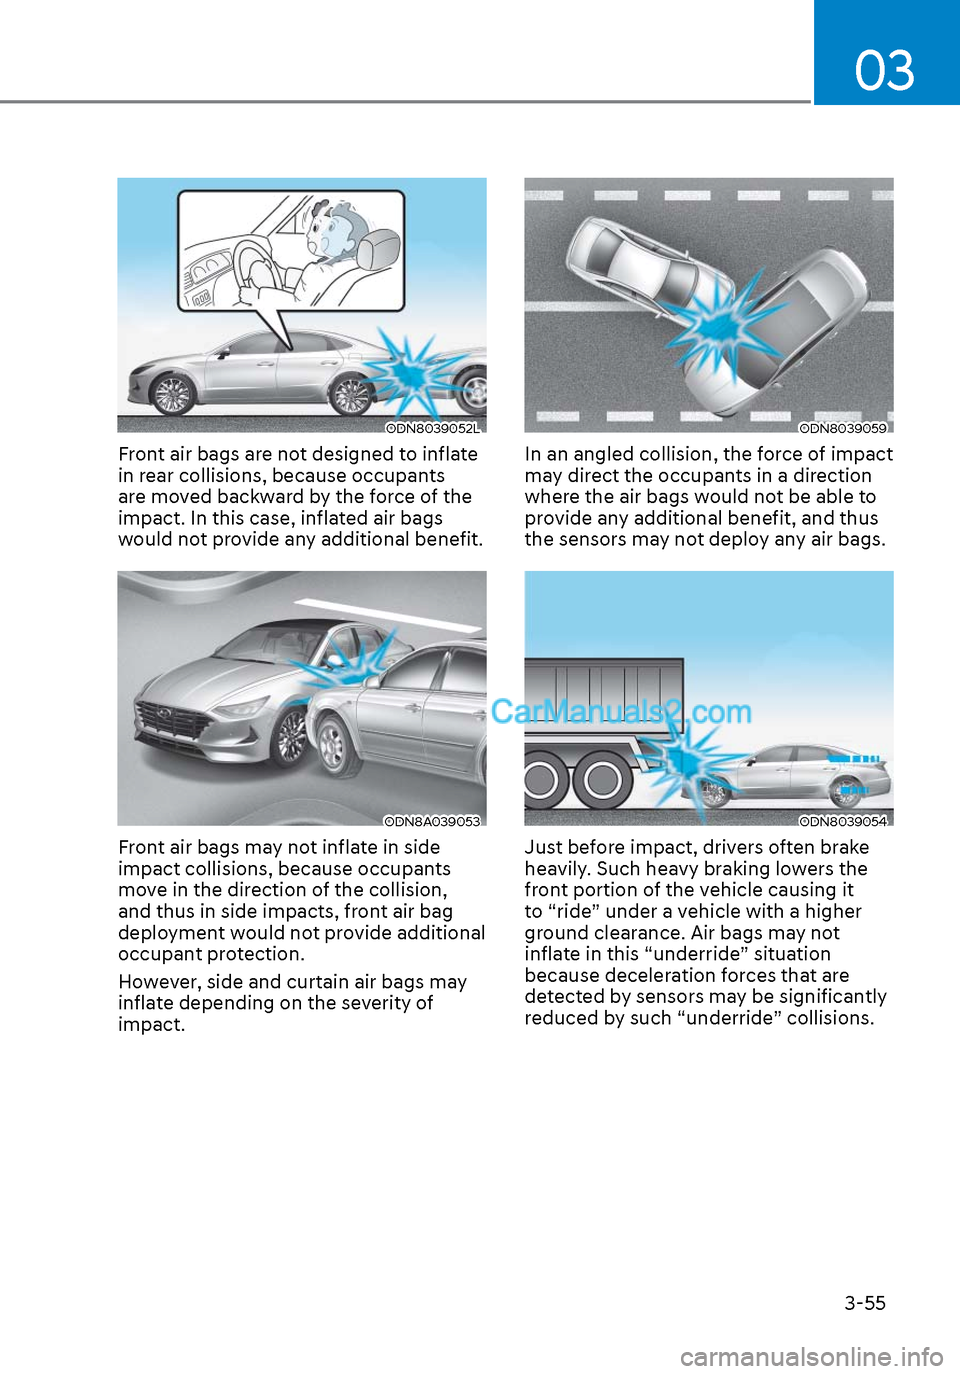 Hyundai Sonata 2020  Owners Manual 03
3-55
ODN8039052LODN8039052L
Front air bags are not designed to inflate 
in rear collisions, because occupants 
are moved backward by the force of the 
impact. In this case, inflated air bags 
would